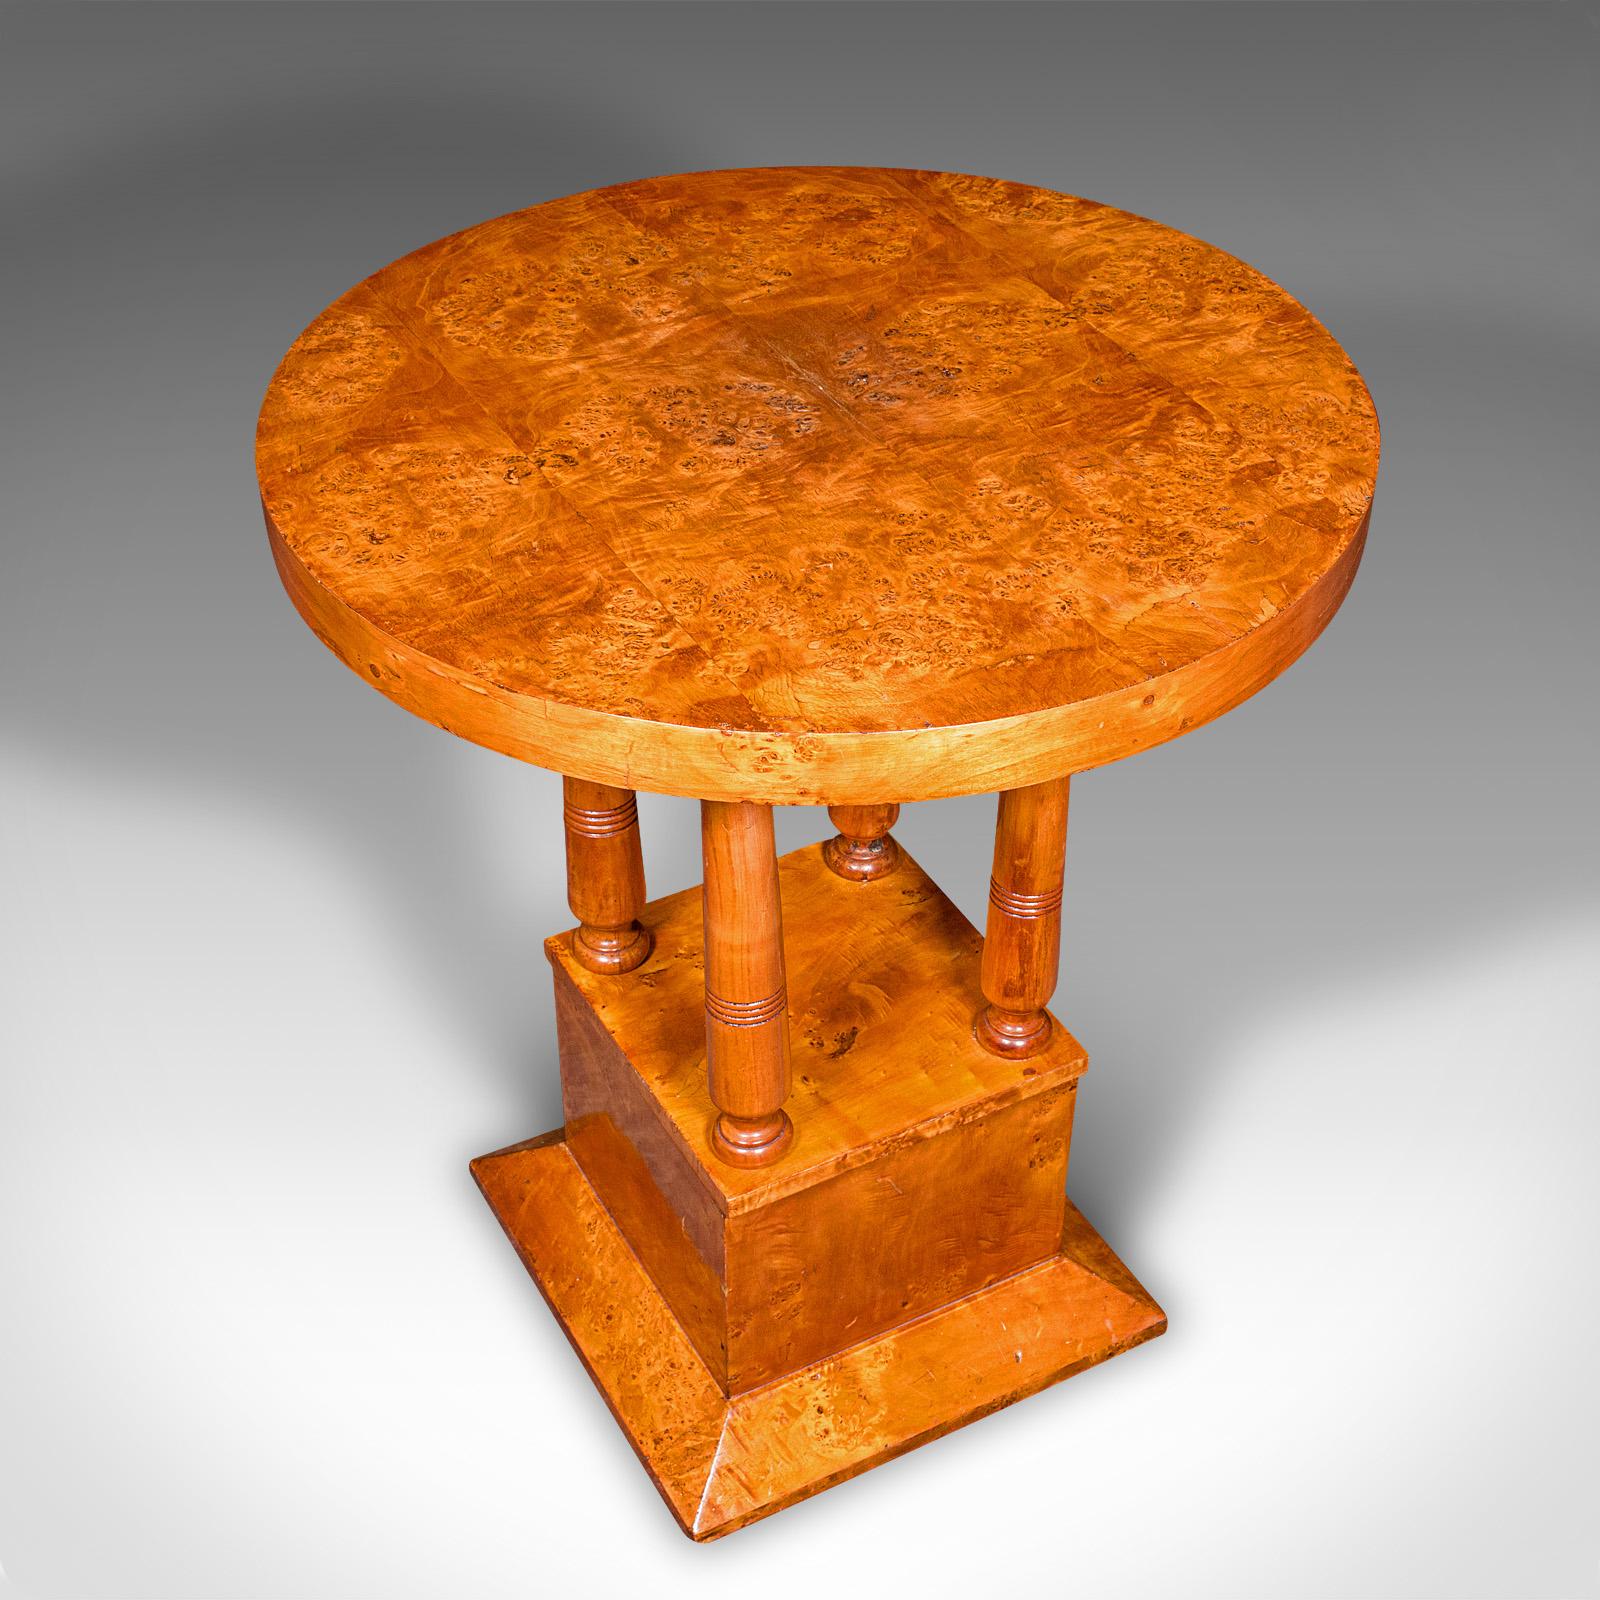 Vintage Podium Hall Table, French, Birds Eye Maple, Lamp, Side, Art Deco, C.1930 For Sale 2